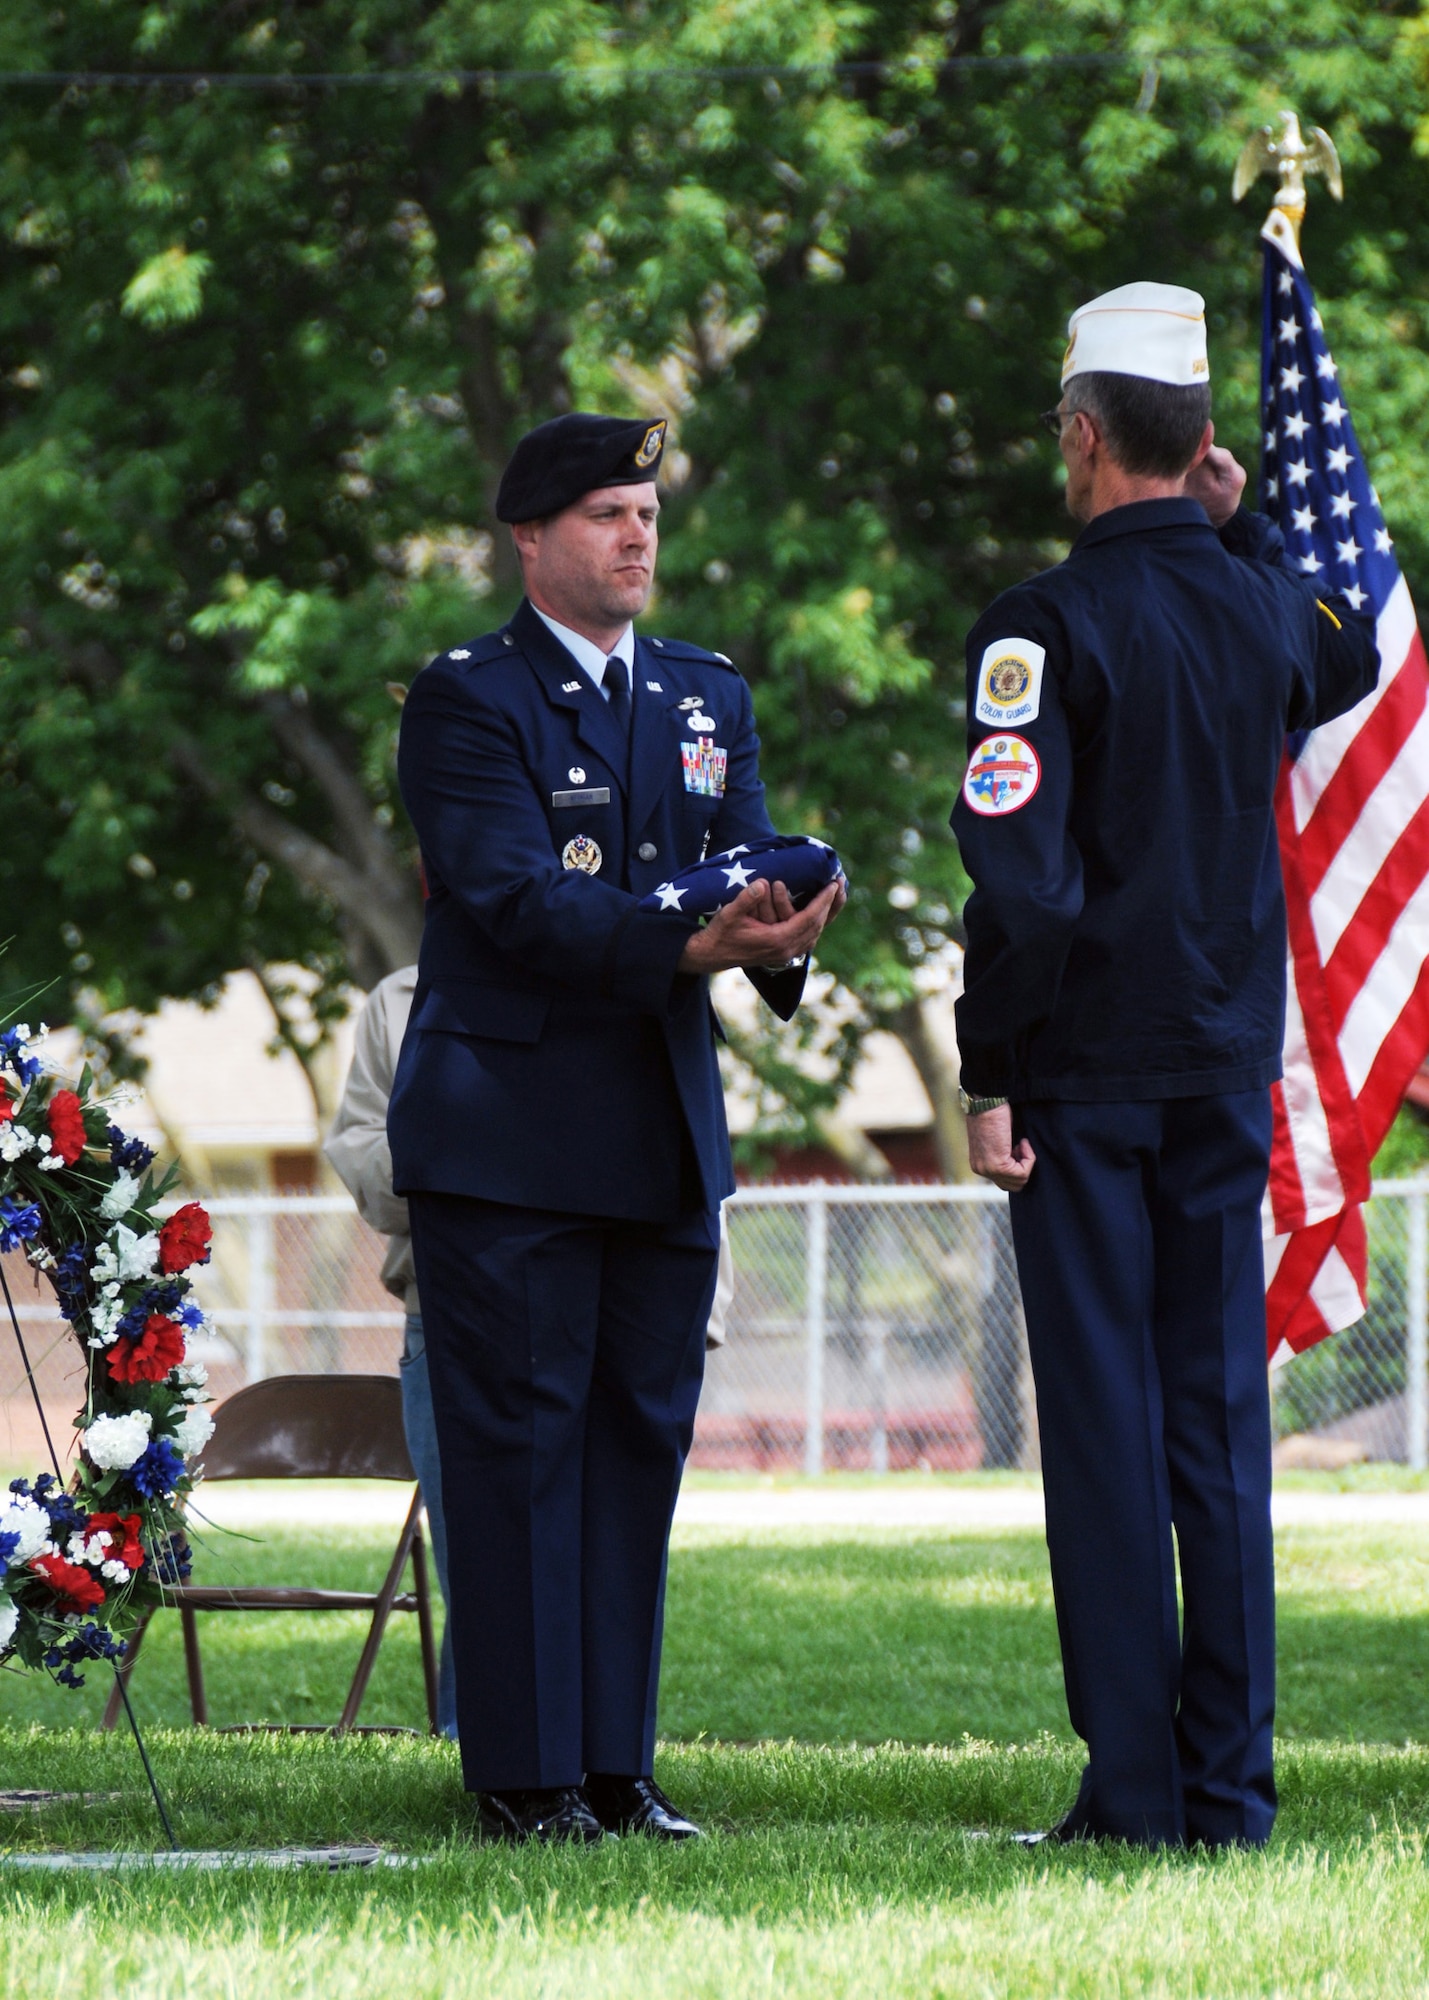 Lt. Col. Christopher Nieman, commander of the 509th Security Forces Squadron, Whiteman Air Force Base, Mo., holds the folded flag as Joe Cochran, Veterans of Foreign Wars Post 2591, salutes during an Armed Forces Day ceremony May 17, 2014, in Sedalia, Mo. Nieman and more than 50 Airmen of the 509th SFS stood alongside family members of 2nd Lt. George A. Whiteman, Sedalia Veterans and cadets, and community members. (U.S. Air National Guard photo by Senior Airman Nathan Dampf/Released)